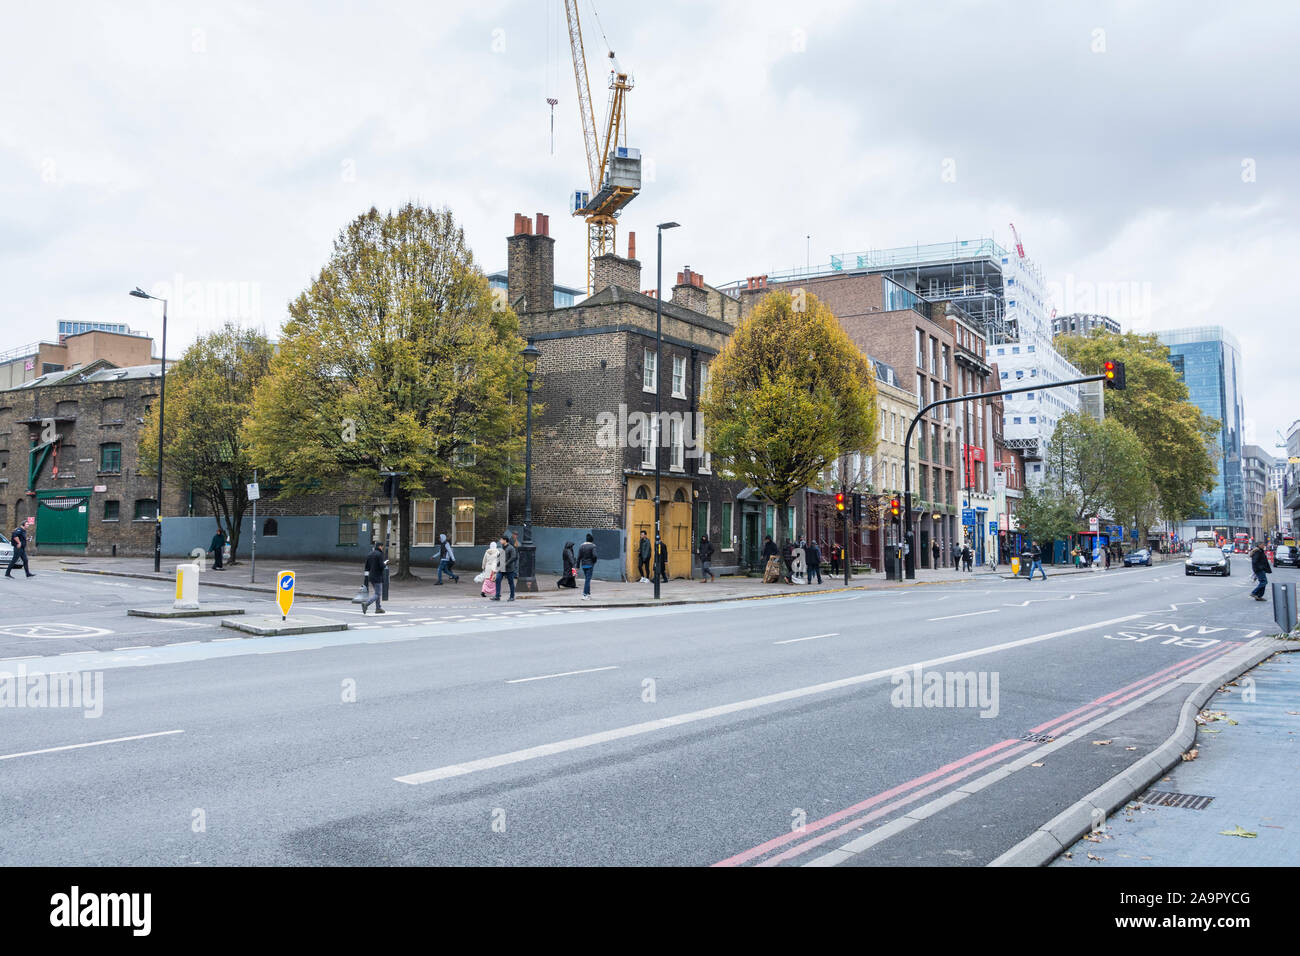 Plans approved for building a boutique hotel on the site of the world-famous Whitechapel Bell Foundry in Whitechapel, London, UK Stock Photo